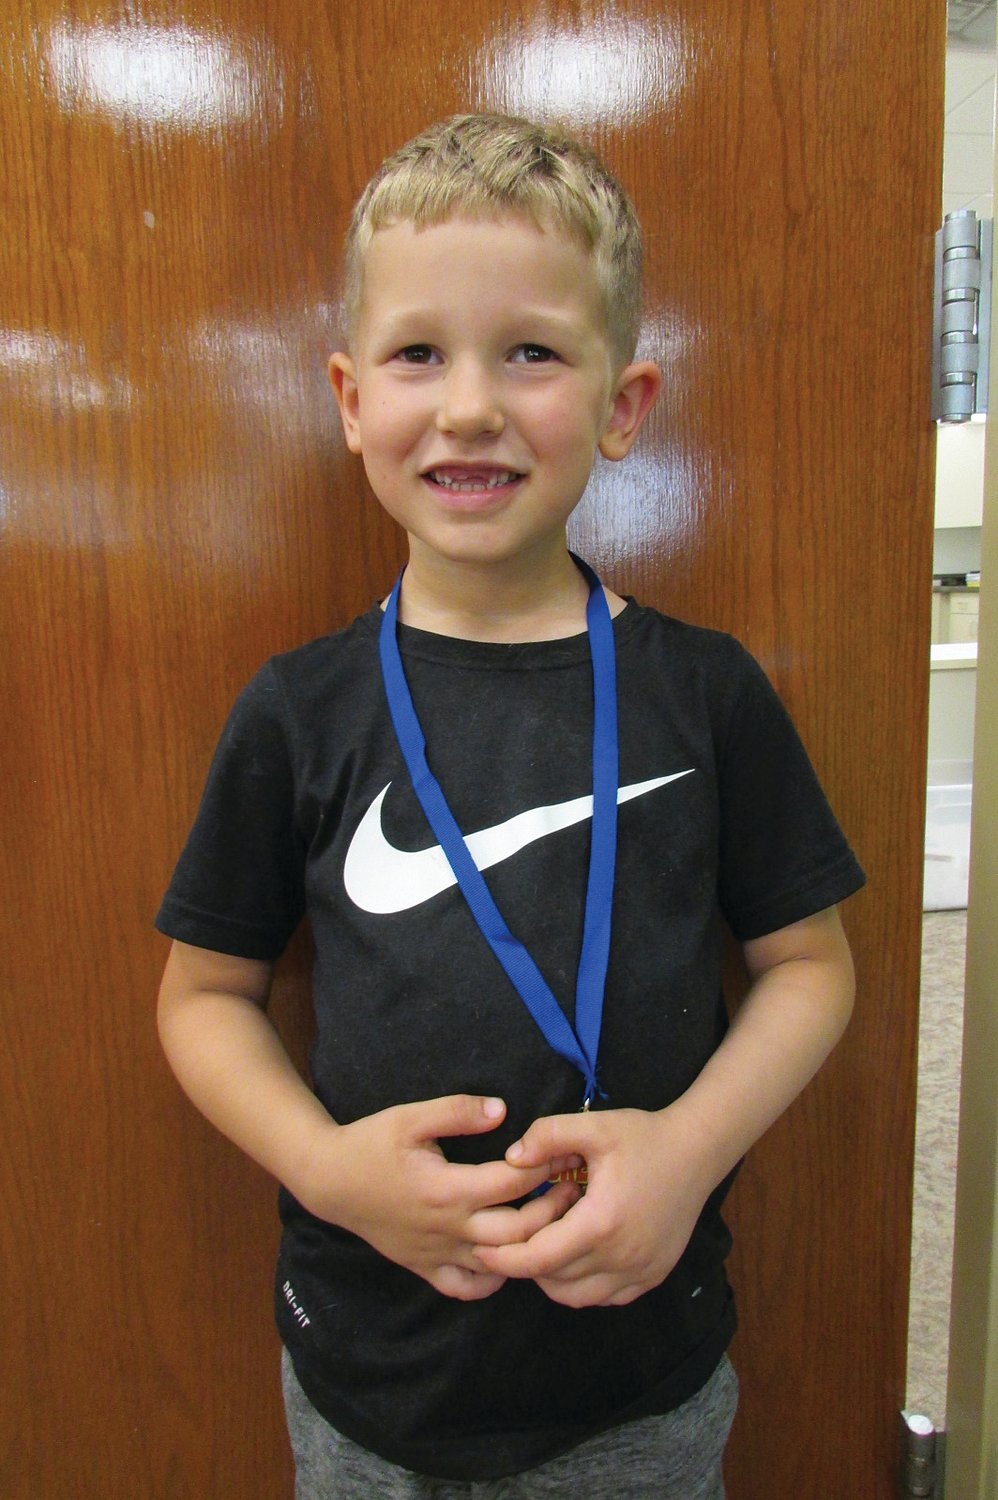 Kane Barsotti, 5, has completed the Crawfordsville District Public Library program, 1,000 Books Before Kindergarten. He is the son of Chris and Kayla Barsotti. Kane's favorite book is any non-fiction book about reptiles. Mom said, "Kane loves going to the library to check out books! He has learned a lot and developed a love for reading through this program."